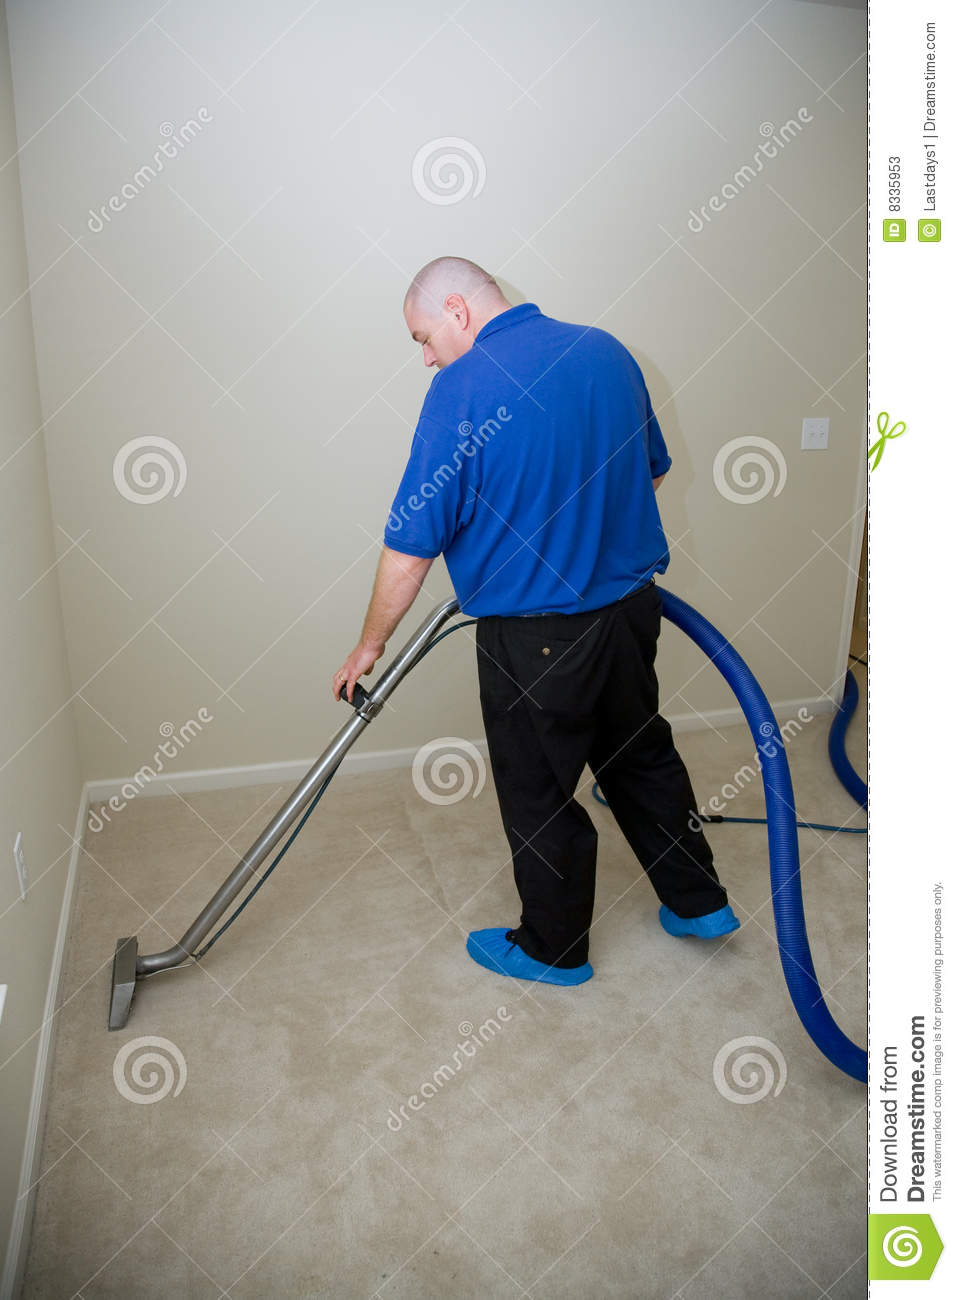 Man Cleaning Carpet And Removing Stains With Commercial Equipment